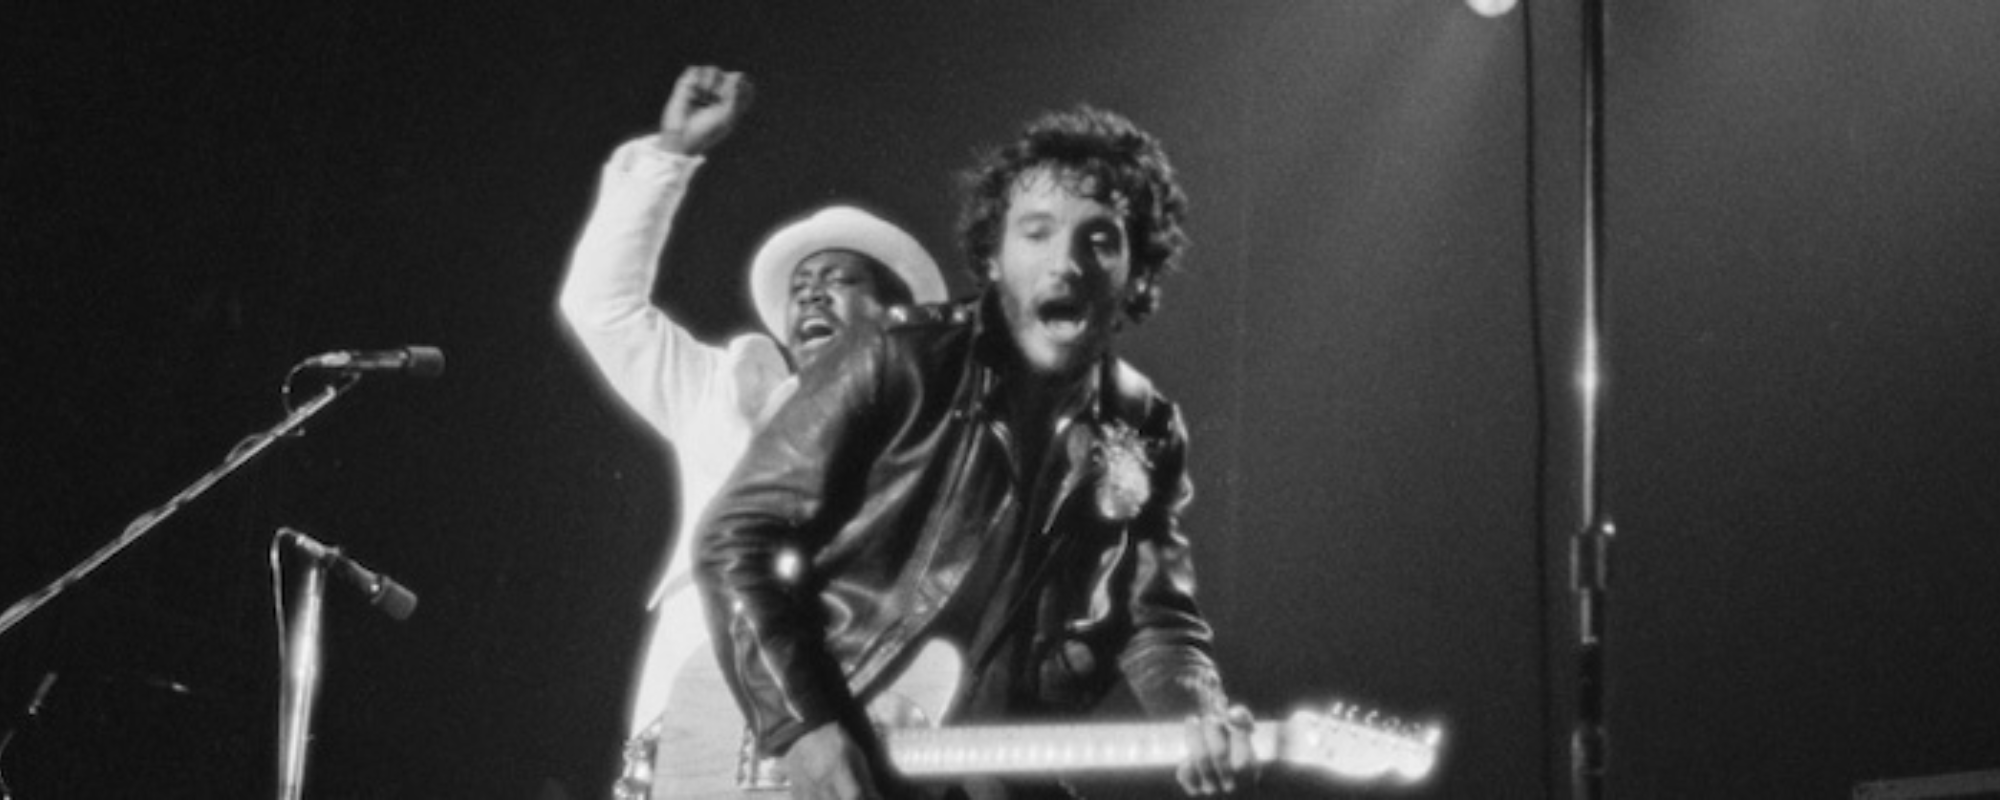 The Meaning Behind the Passionate Song “Born to Run” by Bruce Springsteen